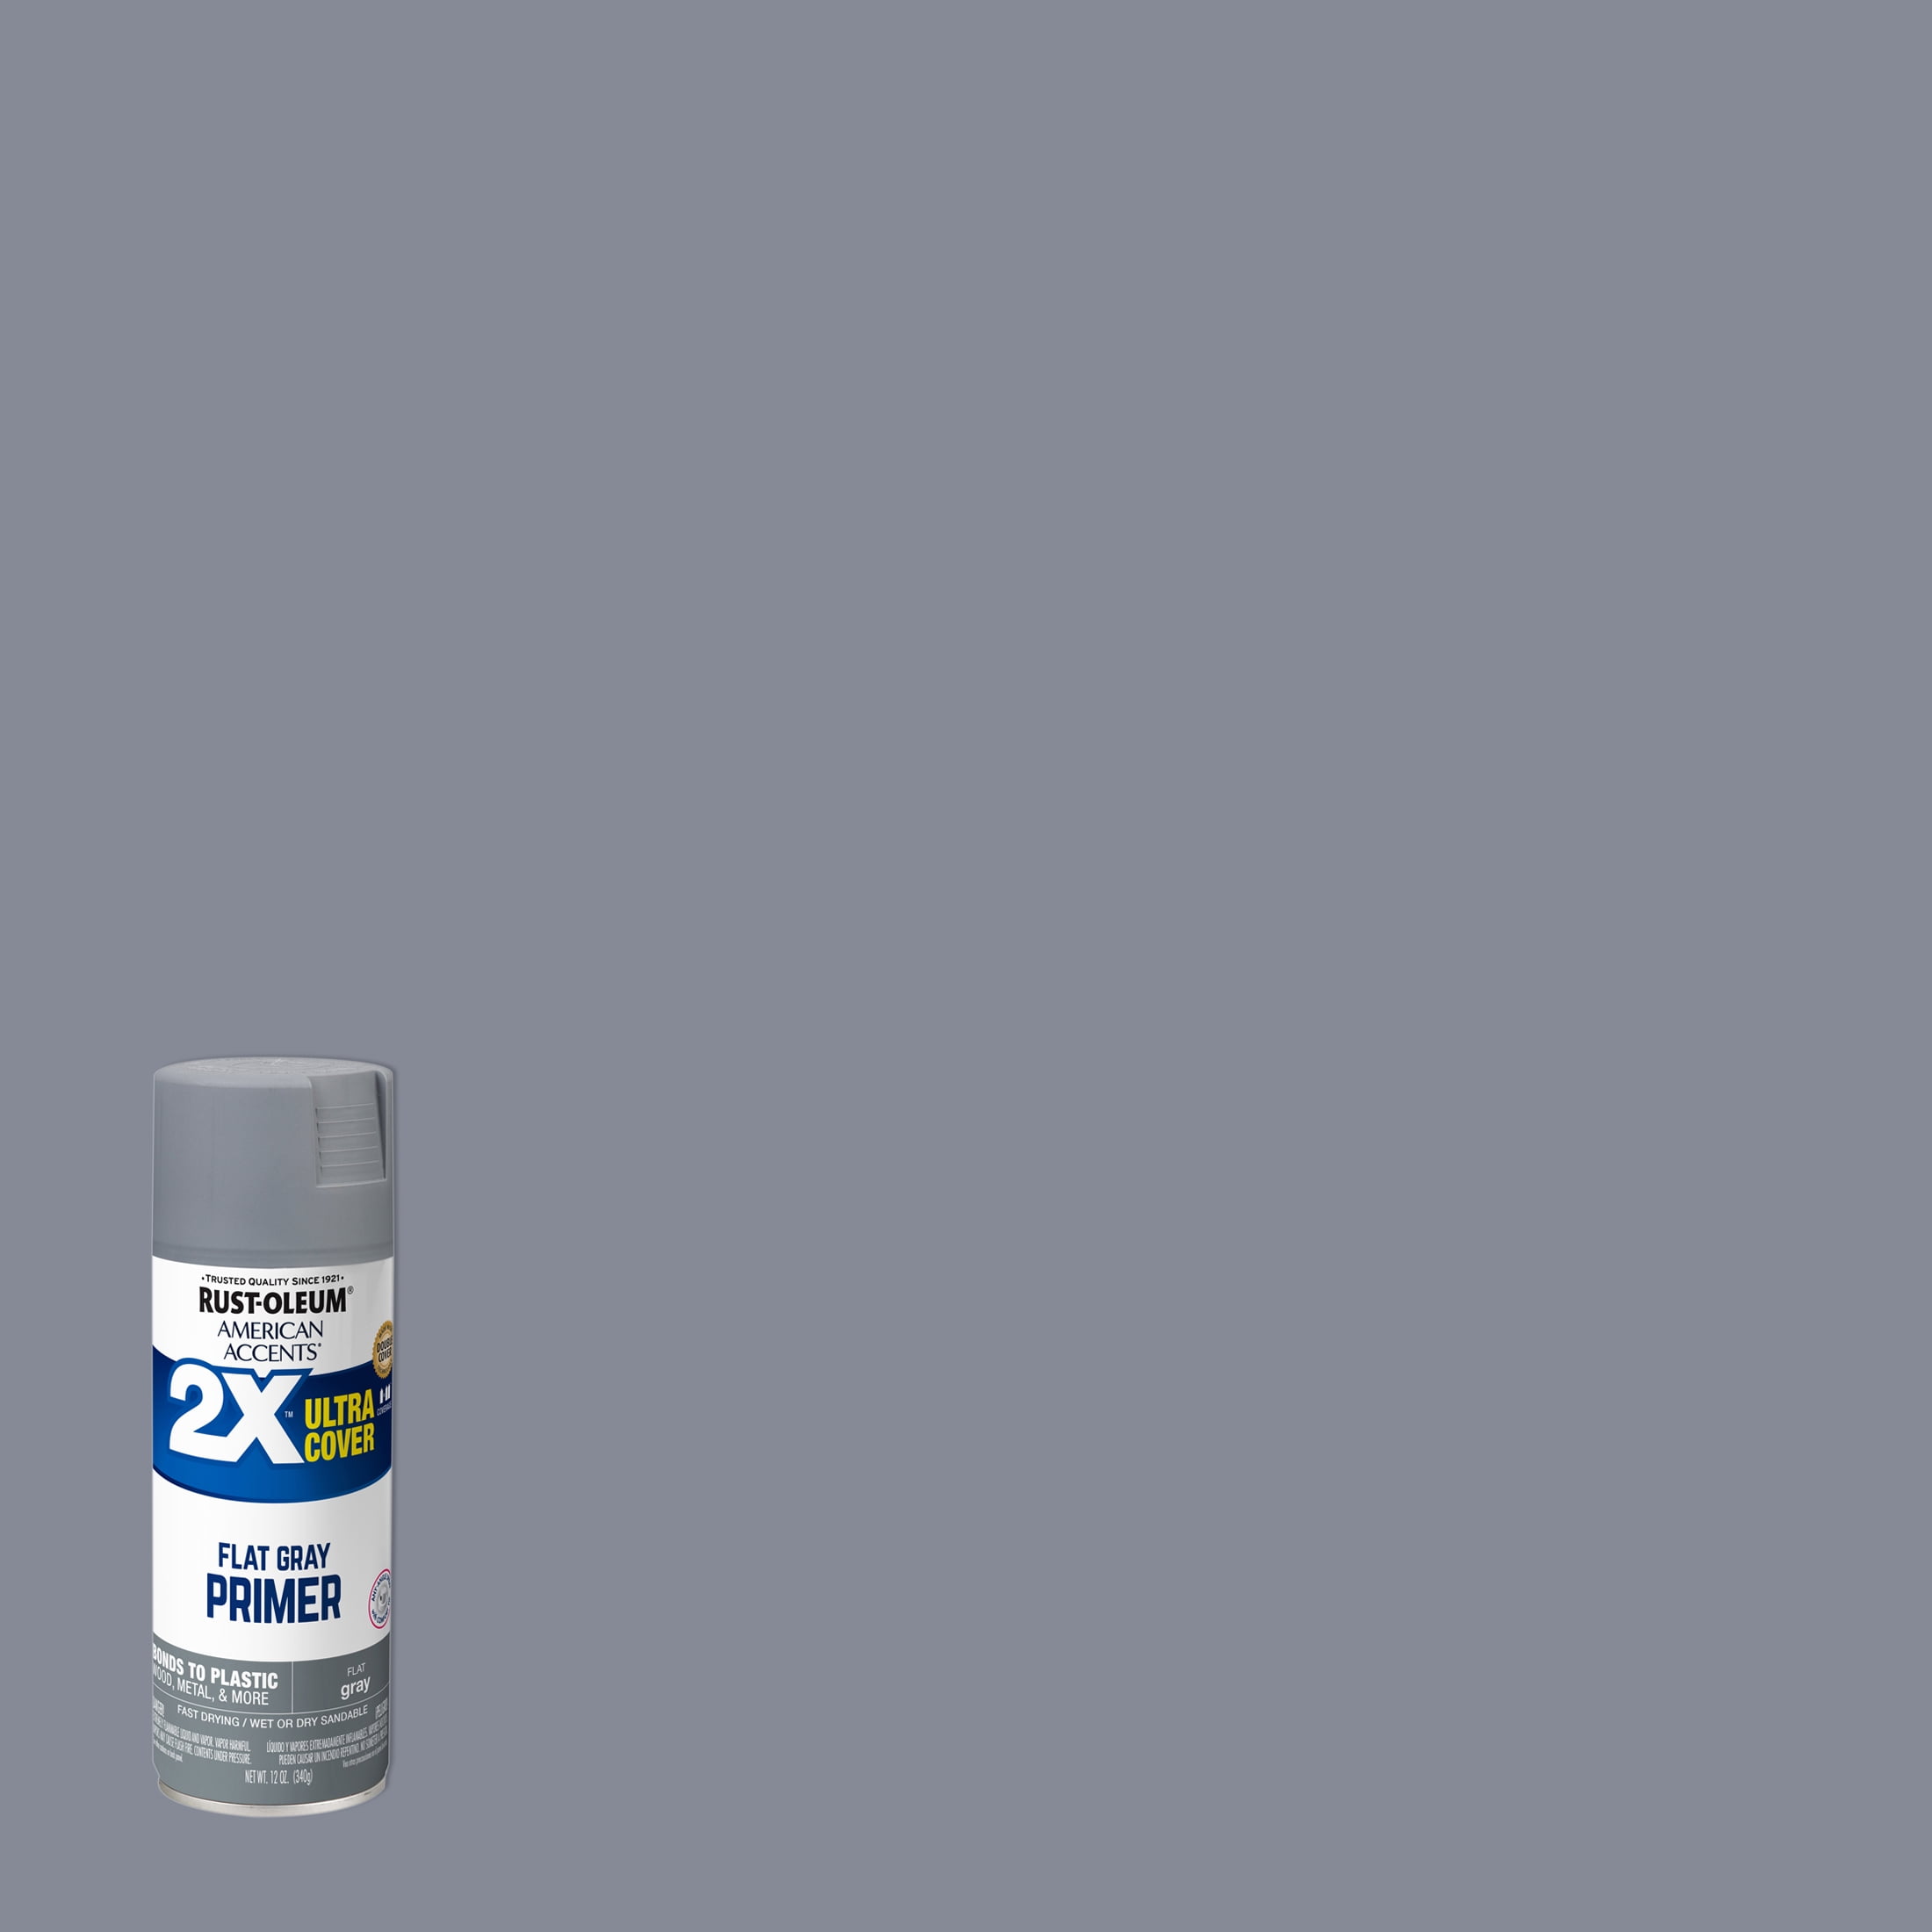 Gray Primer, Rust-Oleum American Accents 2X Ultra Cover Flat Spray Paint- 12 oz